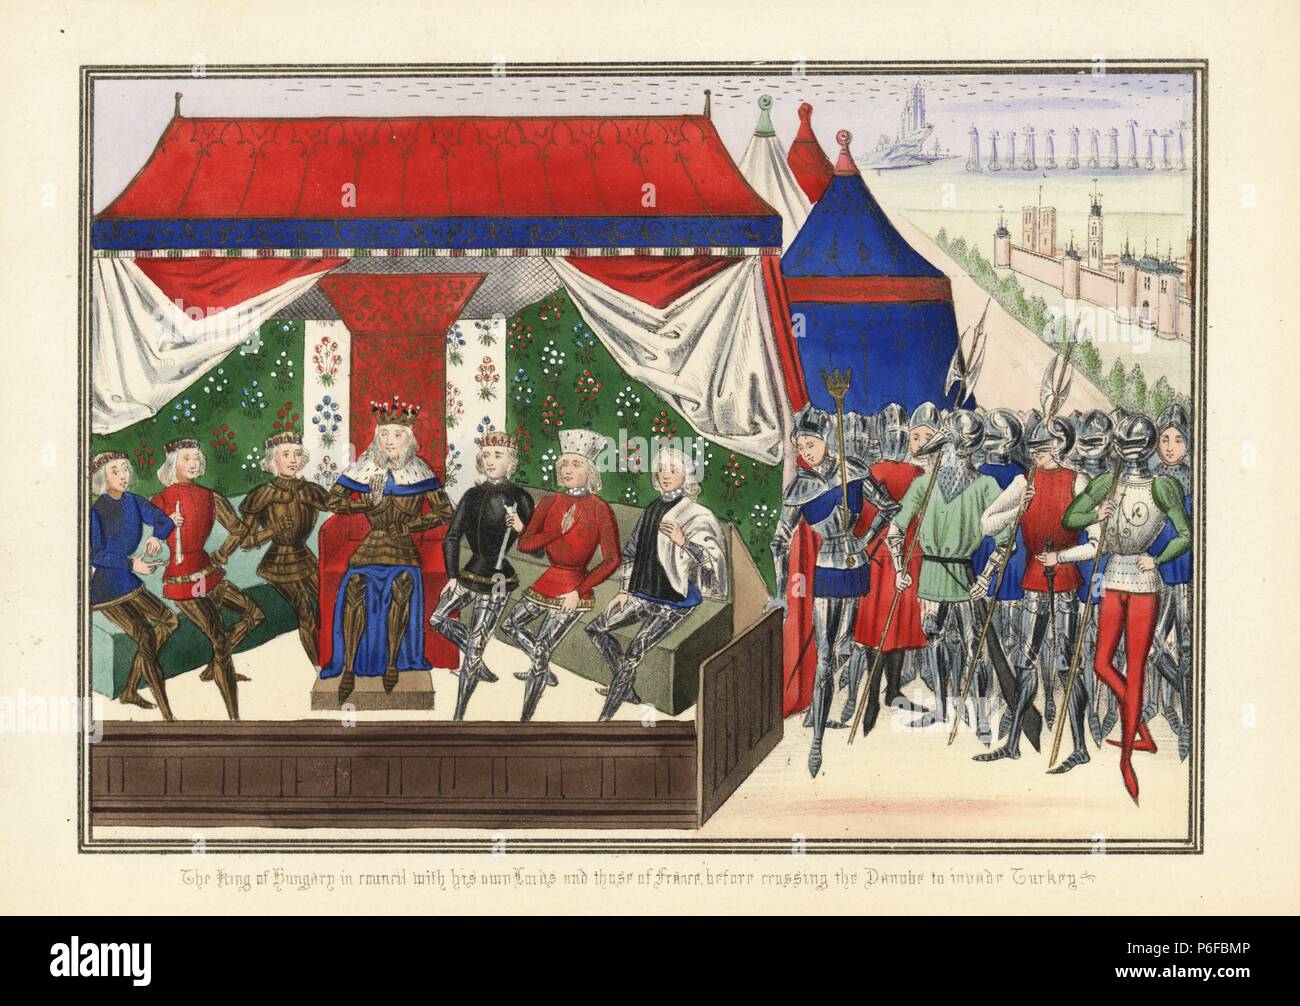 King Sigismund of Hungary in council with his own lords and French lords before crossing the Danube to invade Turkey, 1396. Handcoloured lithograph after an illuminated manuscript from Sir John Froissart's 'Chronicles of England, France, Spain and the Adjoining Countries, from the Latter Part of the Reign of Edward II to the Coronation of Henry IV,' George Routledge, London, 1868. Stock Photo